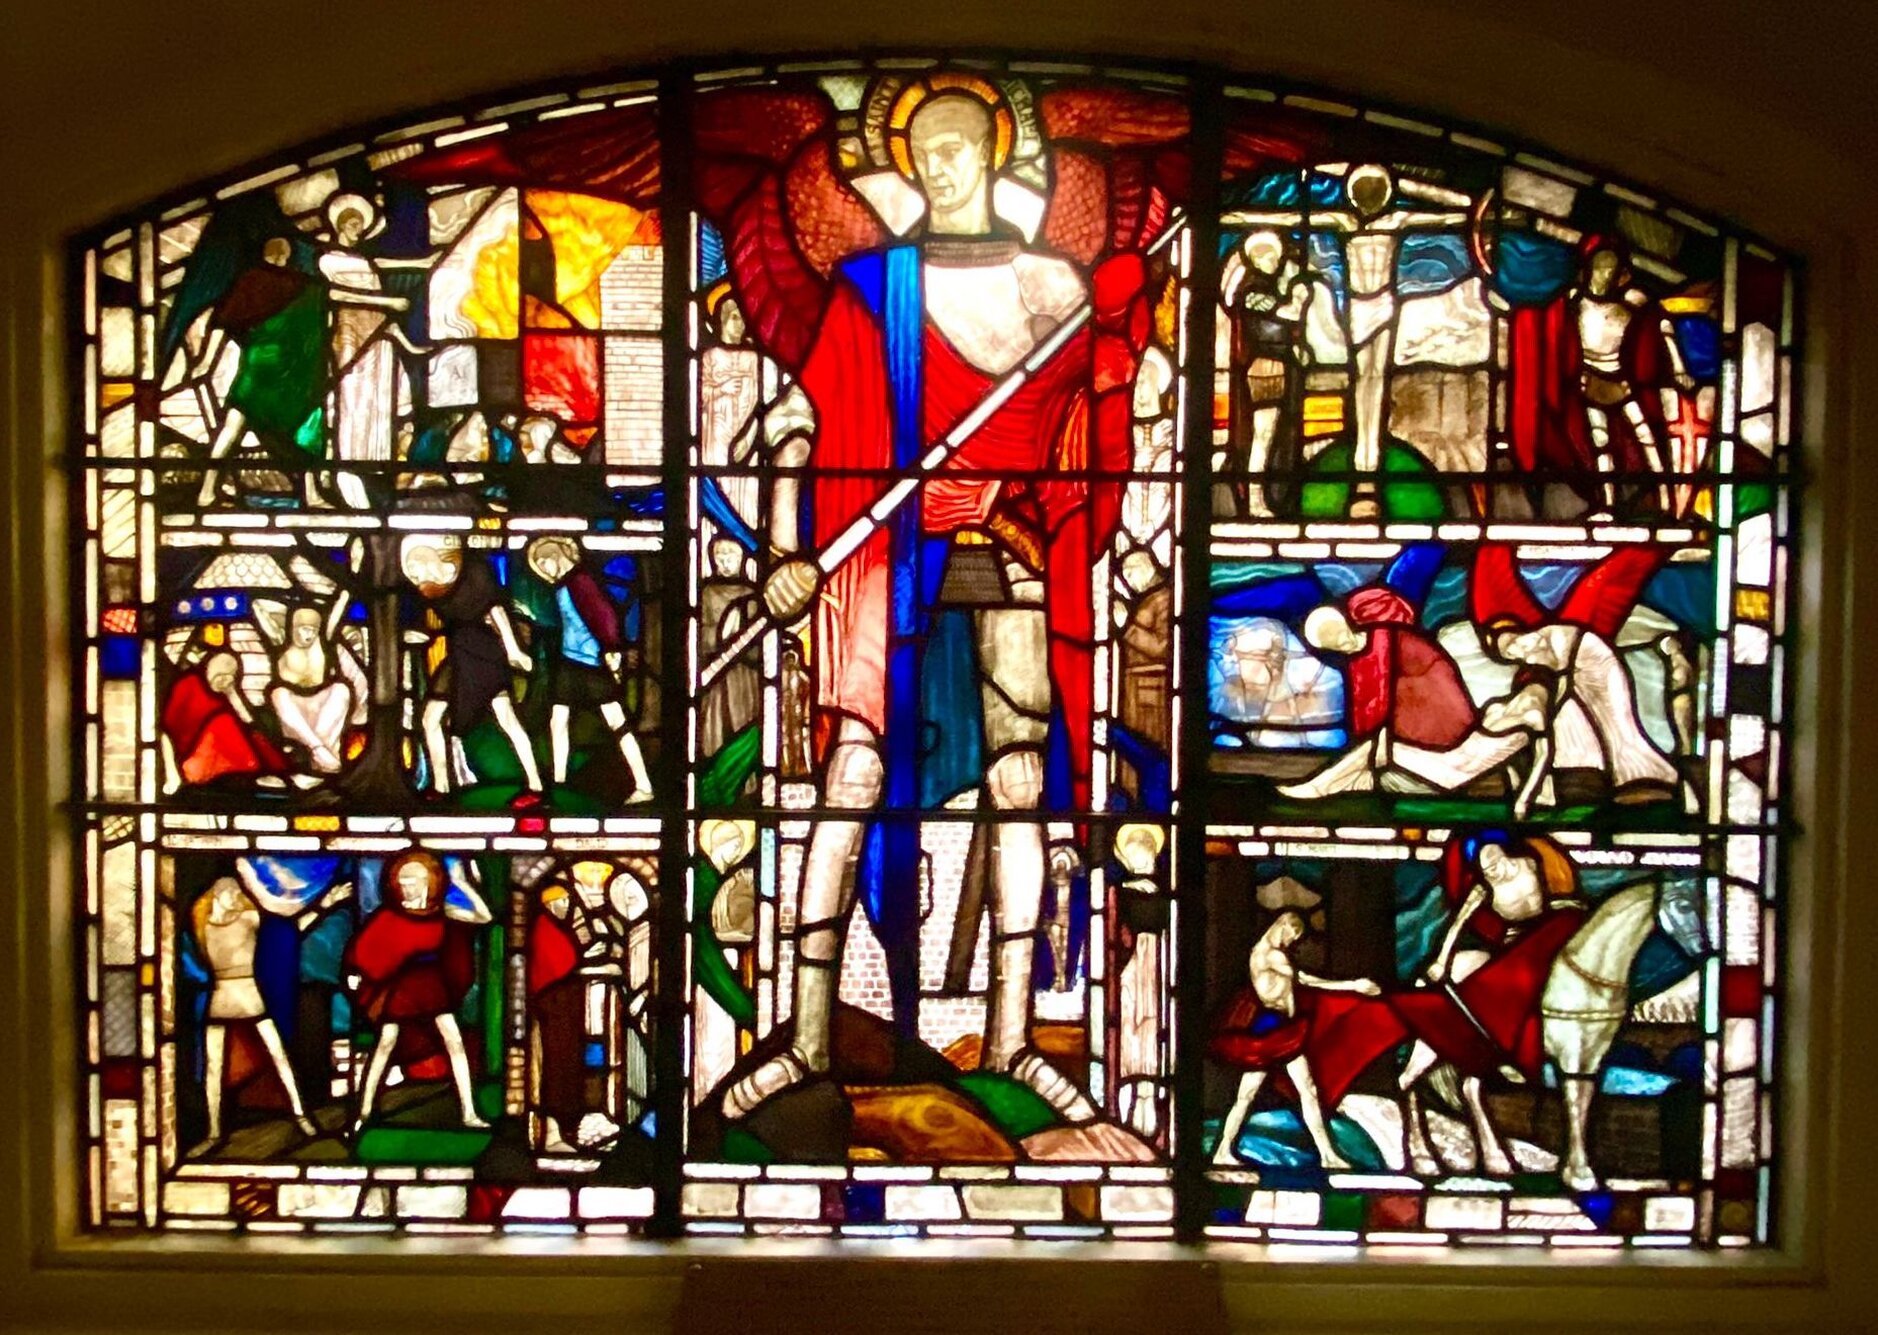 St Ann’s Partners with National Gallery in Stained Glass Tour